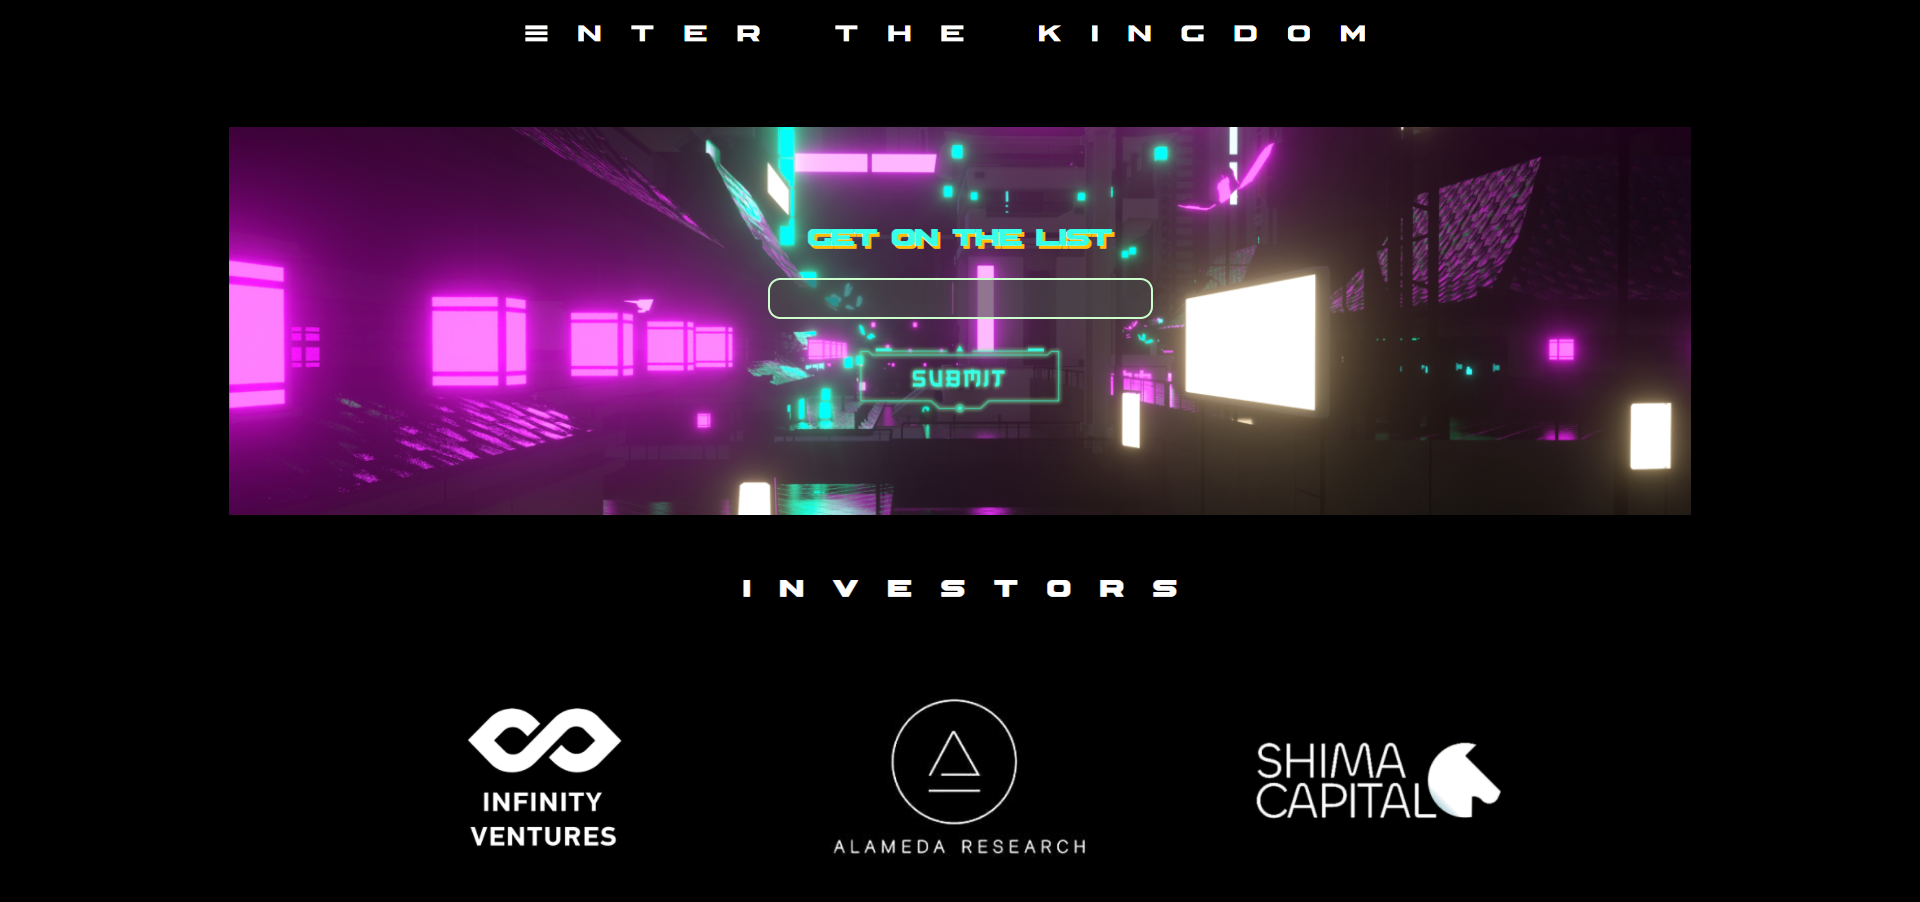 The Kingdom concludes funding round with $3,6 mln raised